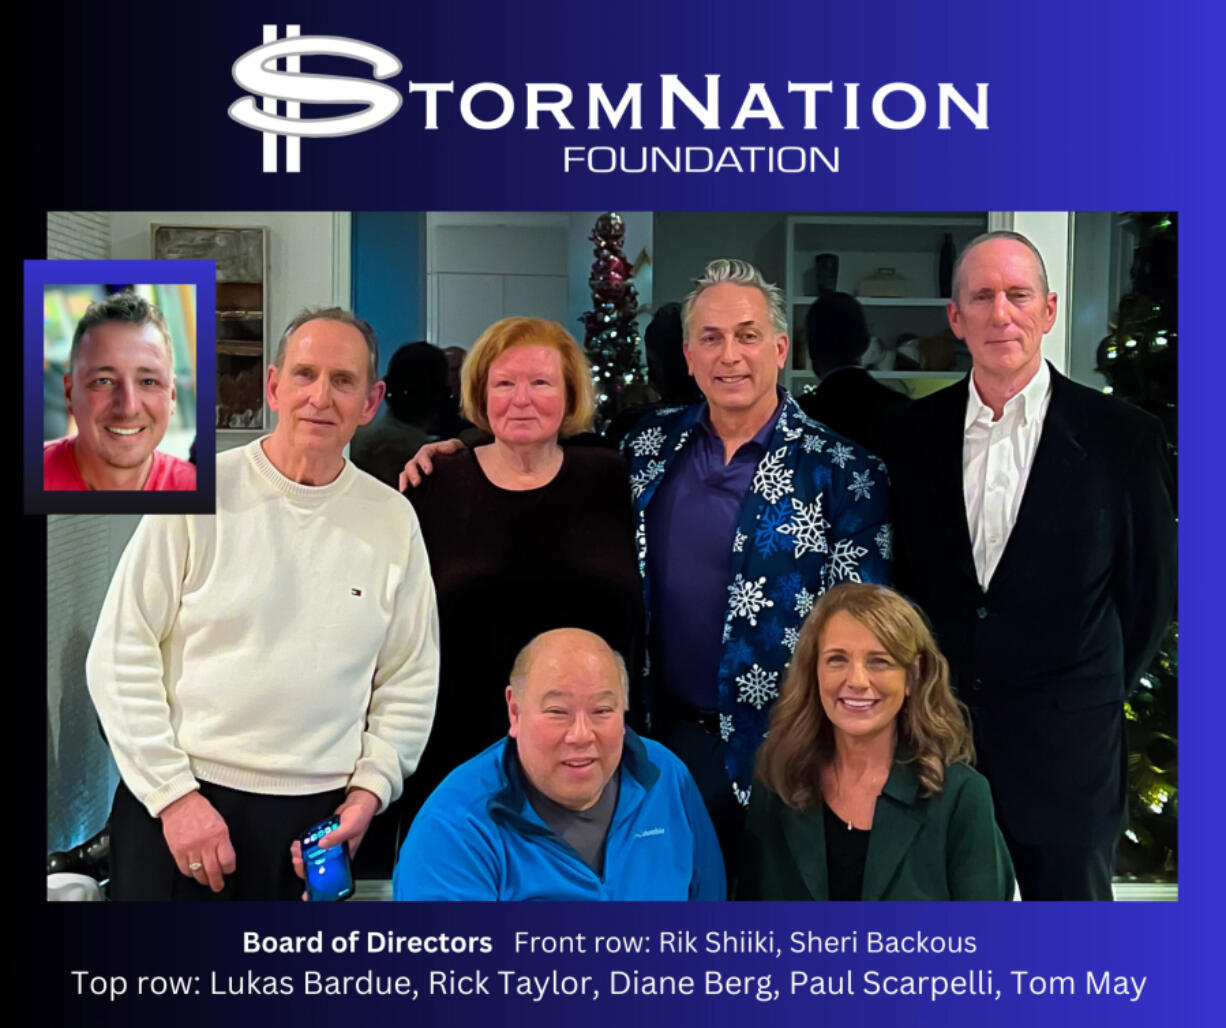 To kick off its new name and nonprofit status, the Storm Nation Foundation announced it will provide $25,000 in scholarships to 2024 Skyview High School graduates.